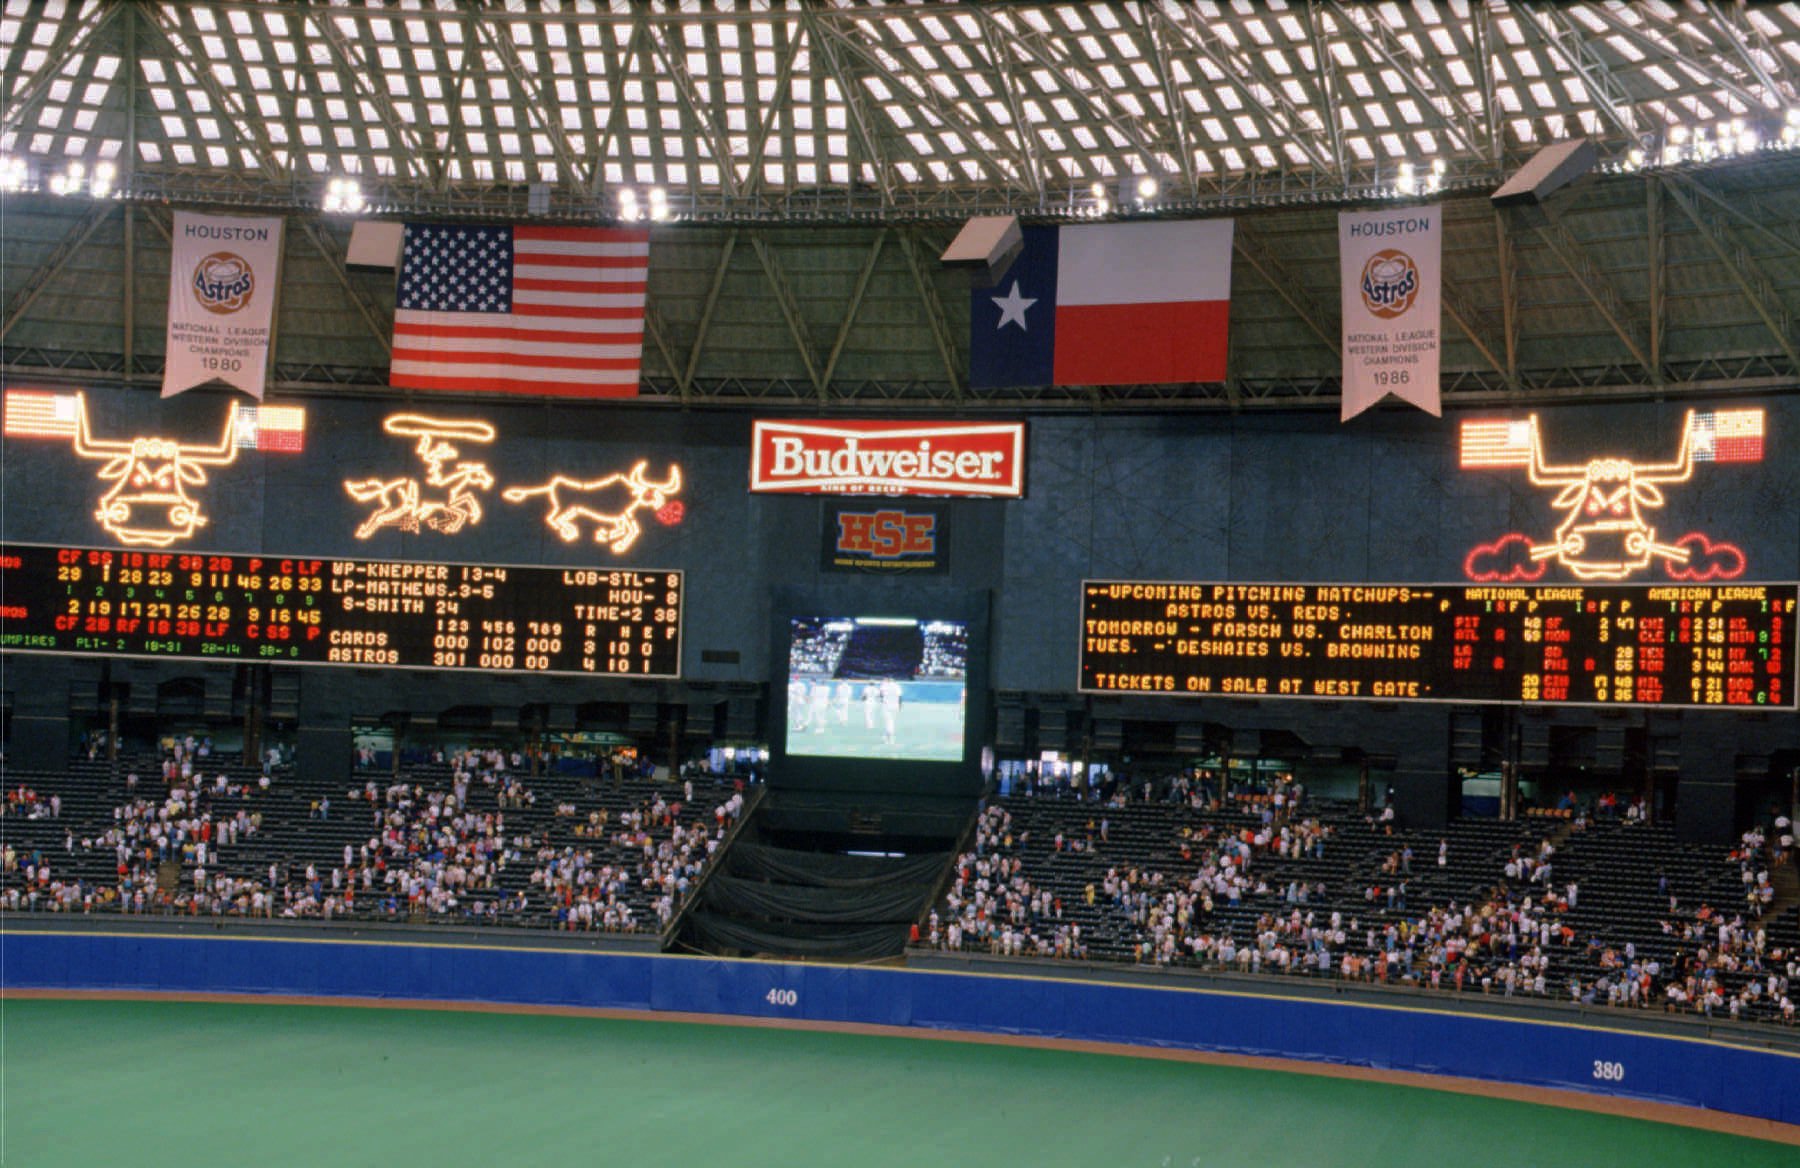 6 All-Star games that lit up the scoreboard